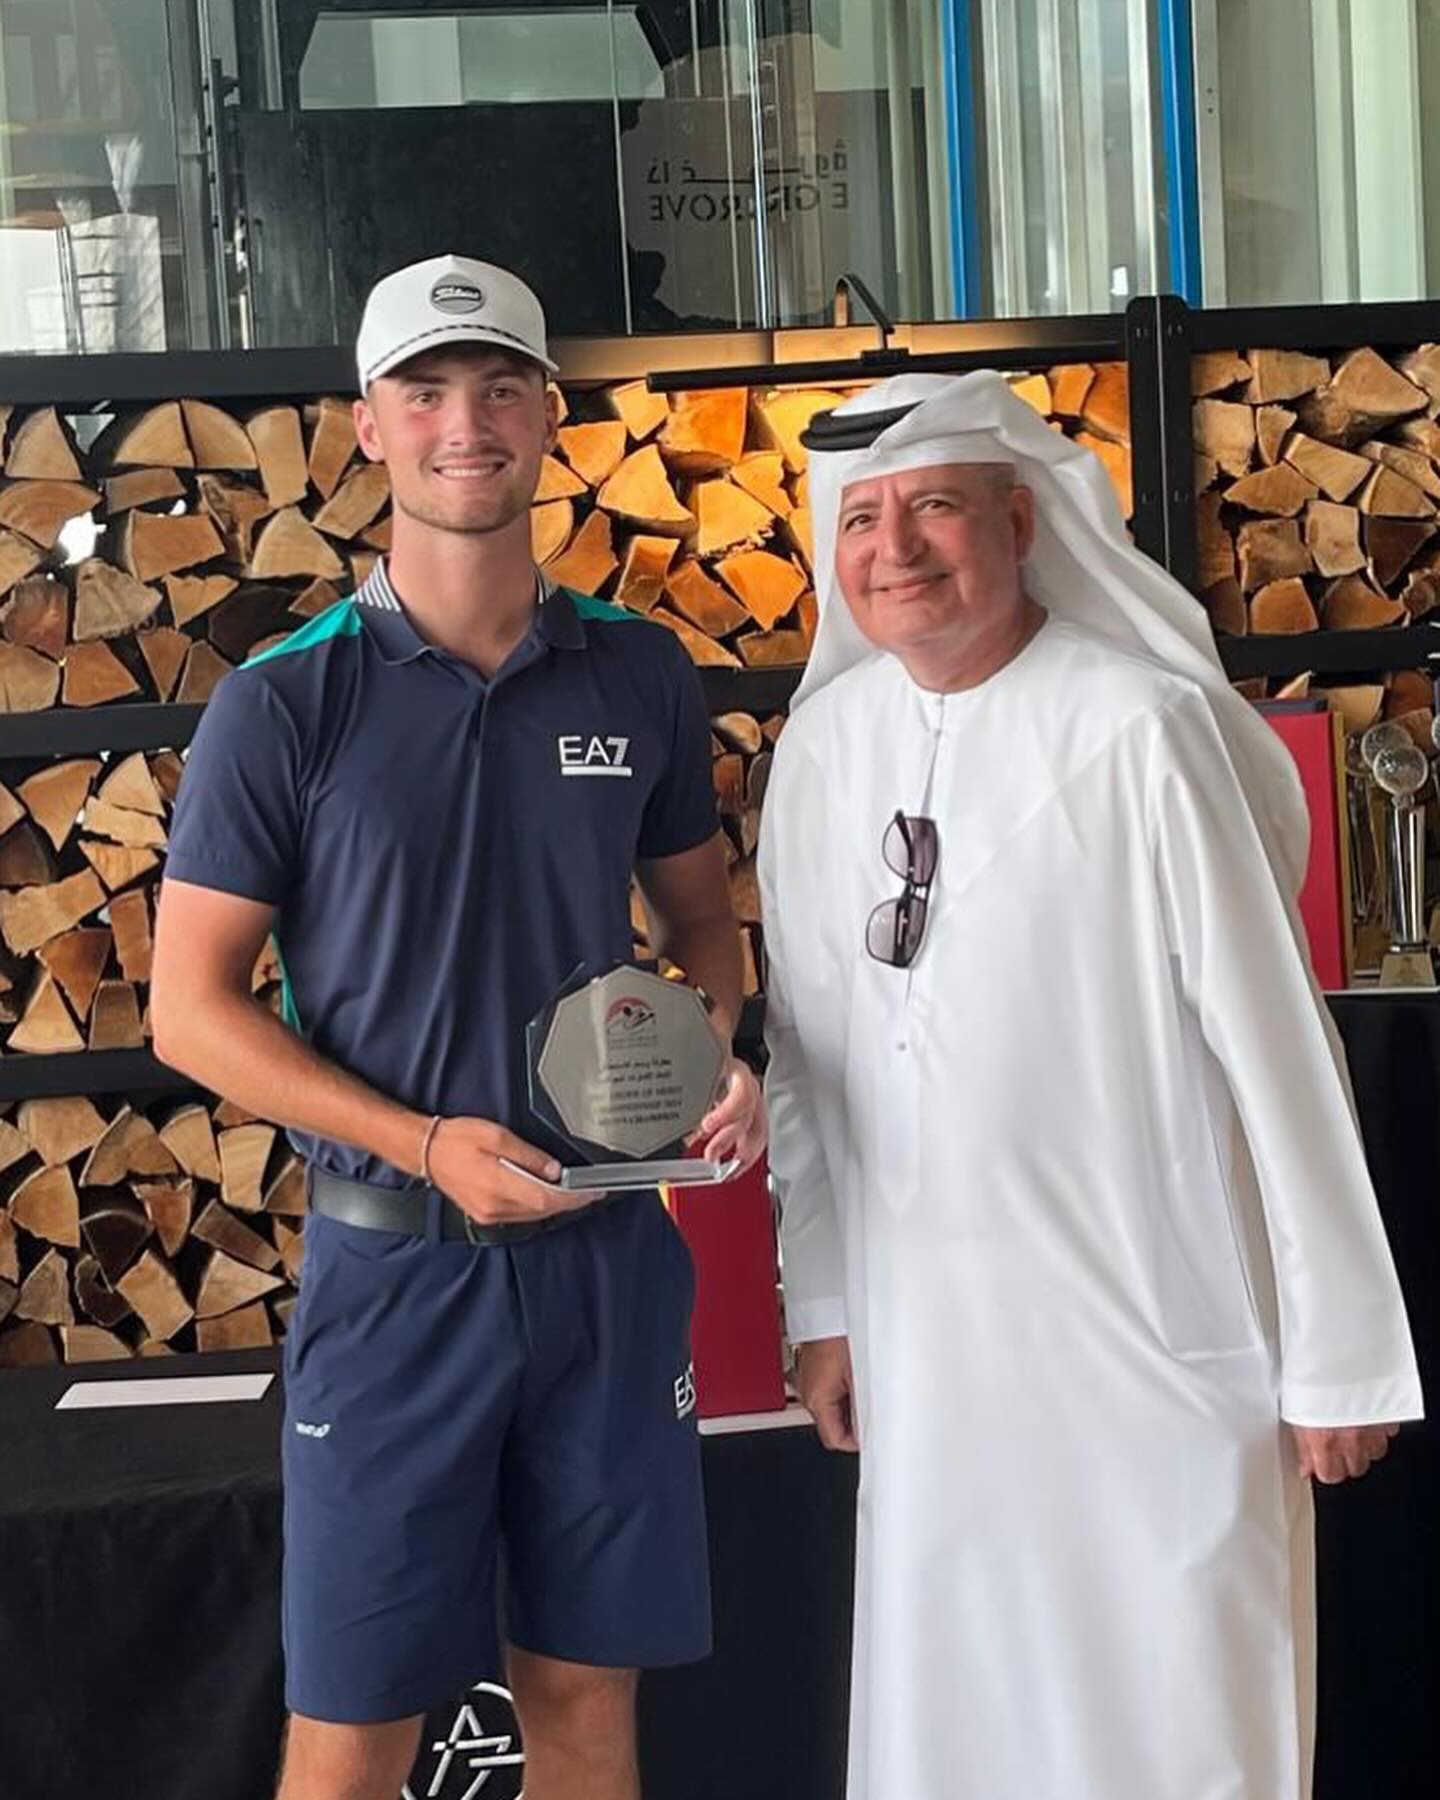 Dominic Morton (left), representing Trump International Golf Club, received the trophy from Walid Alattar, Board Member of the Emirates Golf Federation